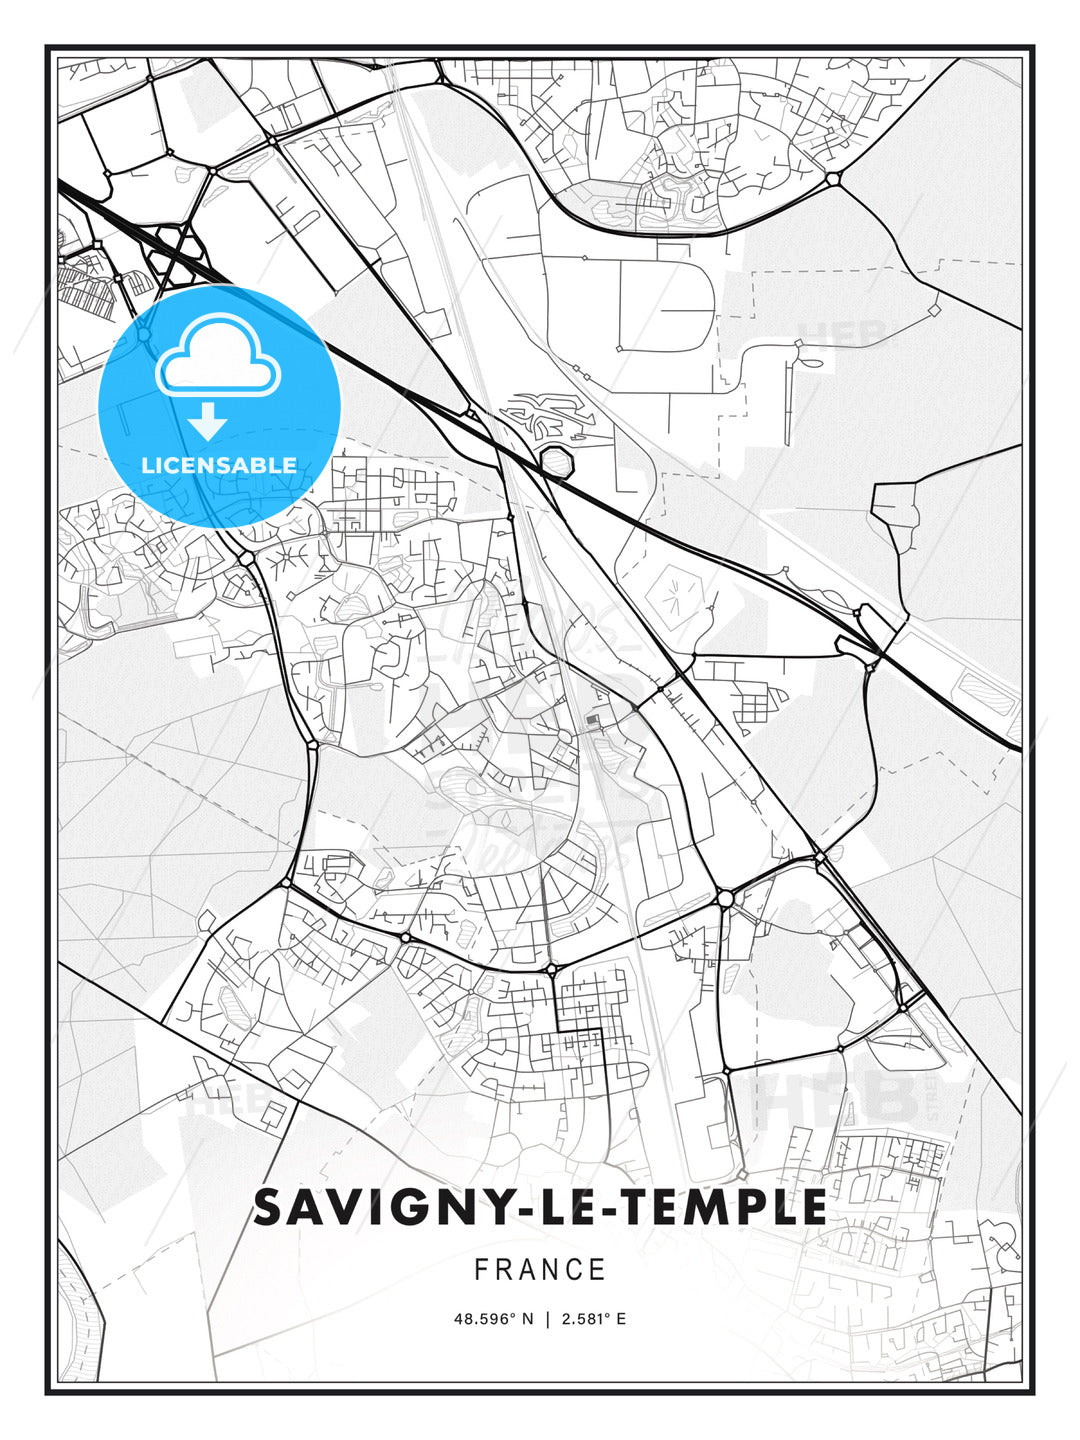 Savigny-le-Temple, France, Modern Print Template in Various Formats - HEBSTREITS Sketches